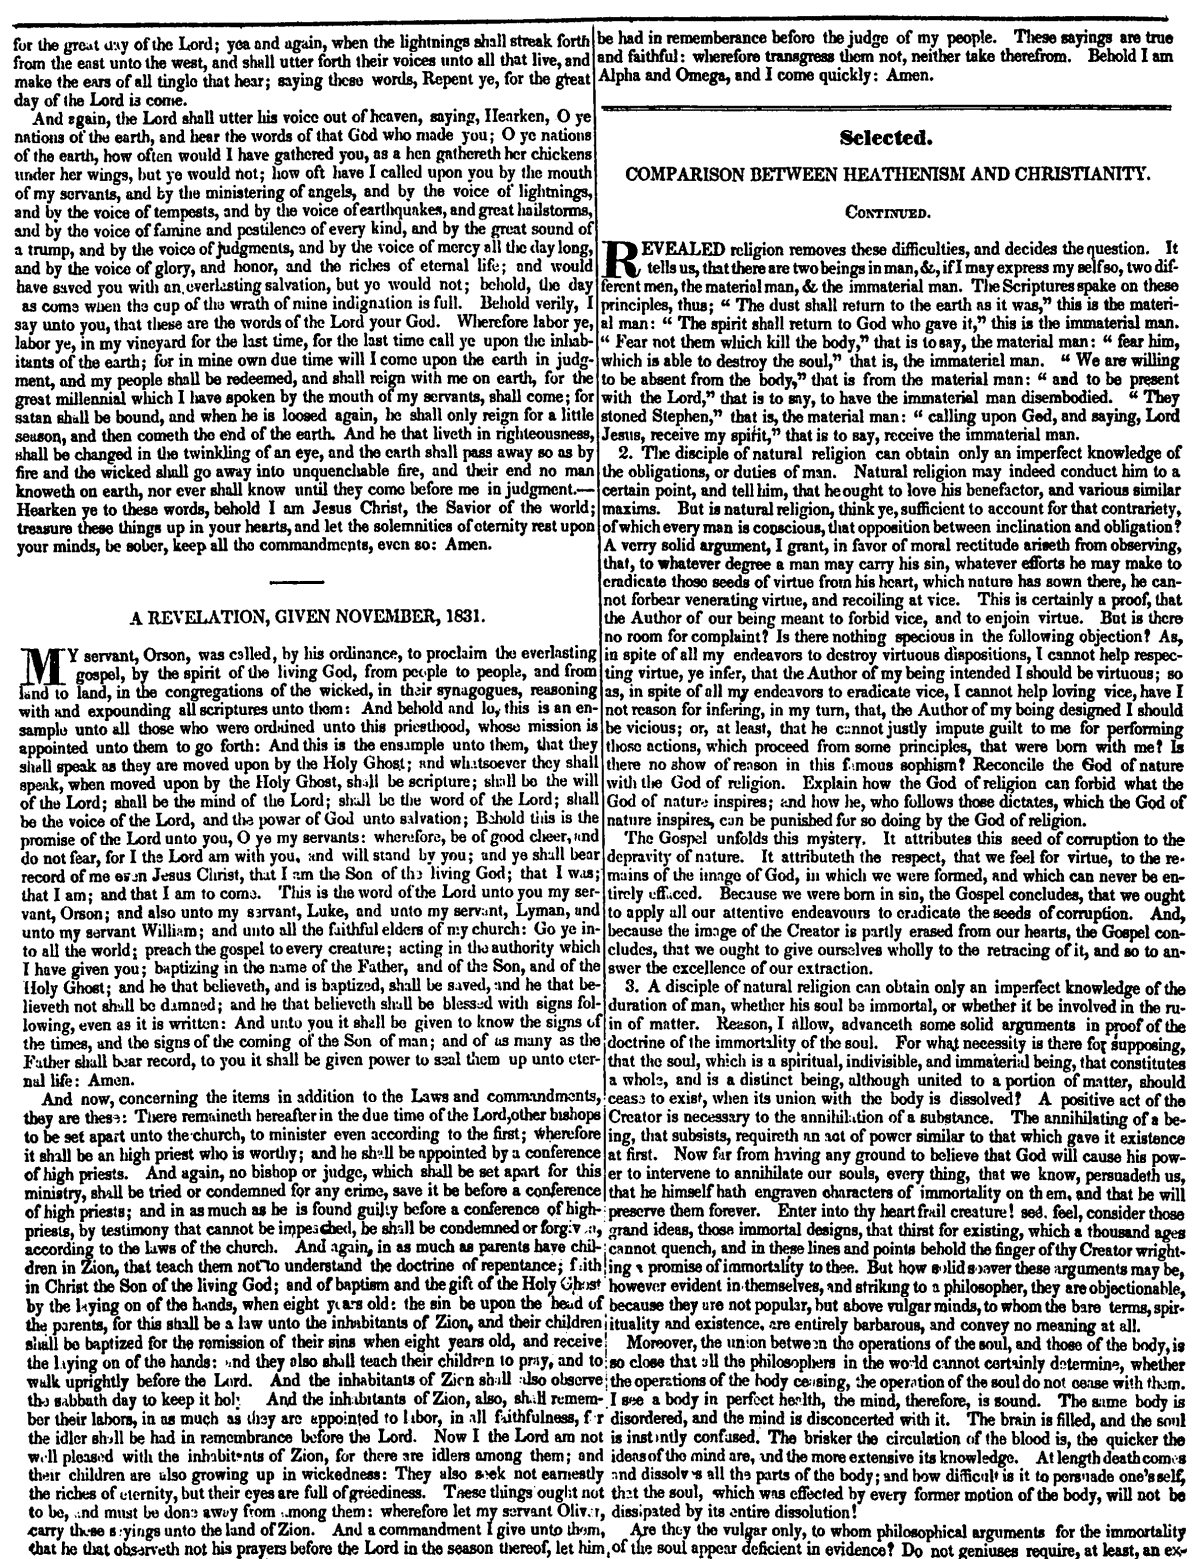 The Evening and Morning Star, October 1832